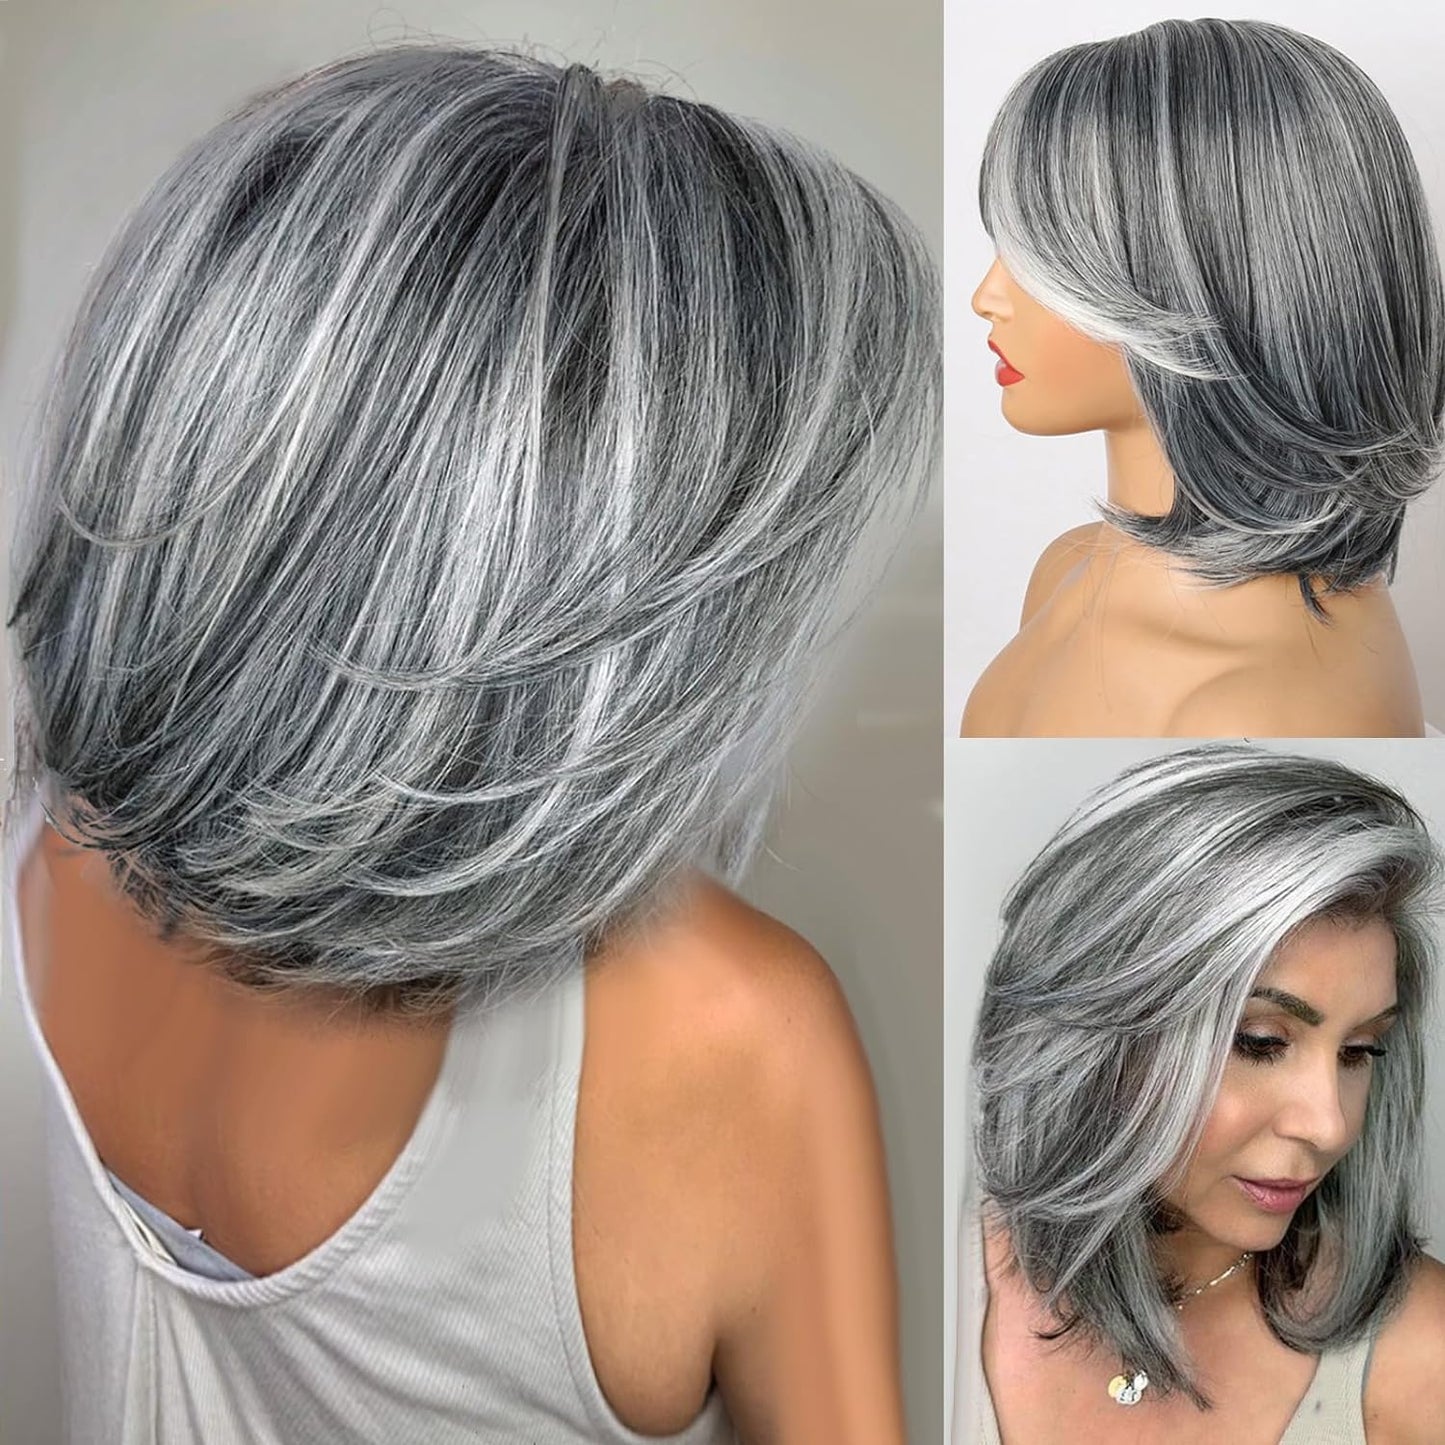 Silver Wig Ombre Gray Wigs with Curtain Bangs for Women Synthetic Highlight Gray Bob Wig Short Silver Wig with Bangs Layered Wig 12Inch Light Grey Short Hair Wigs for Daily Party Use